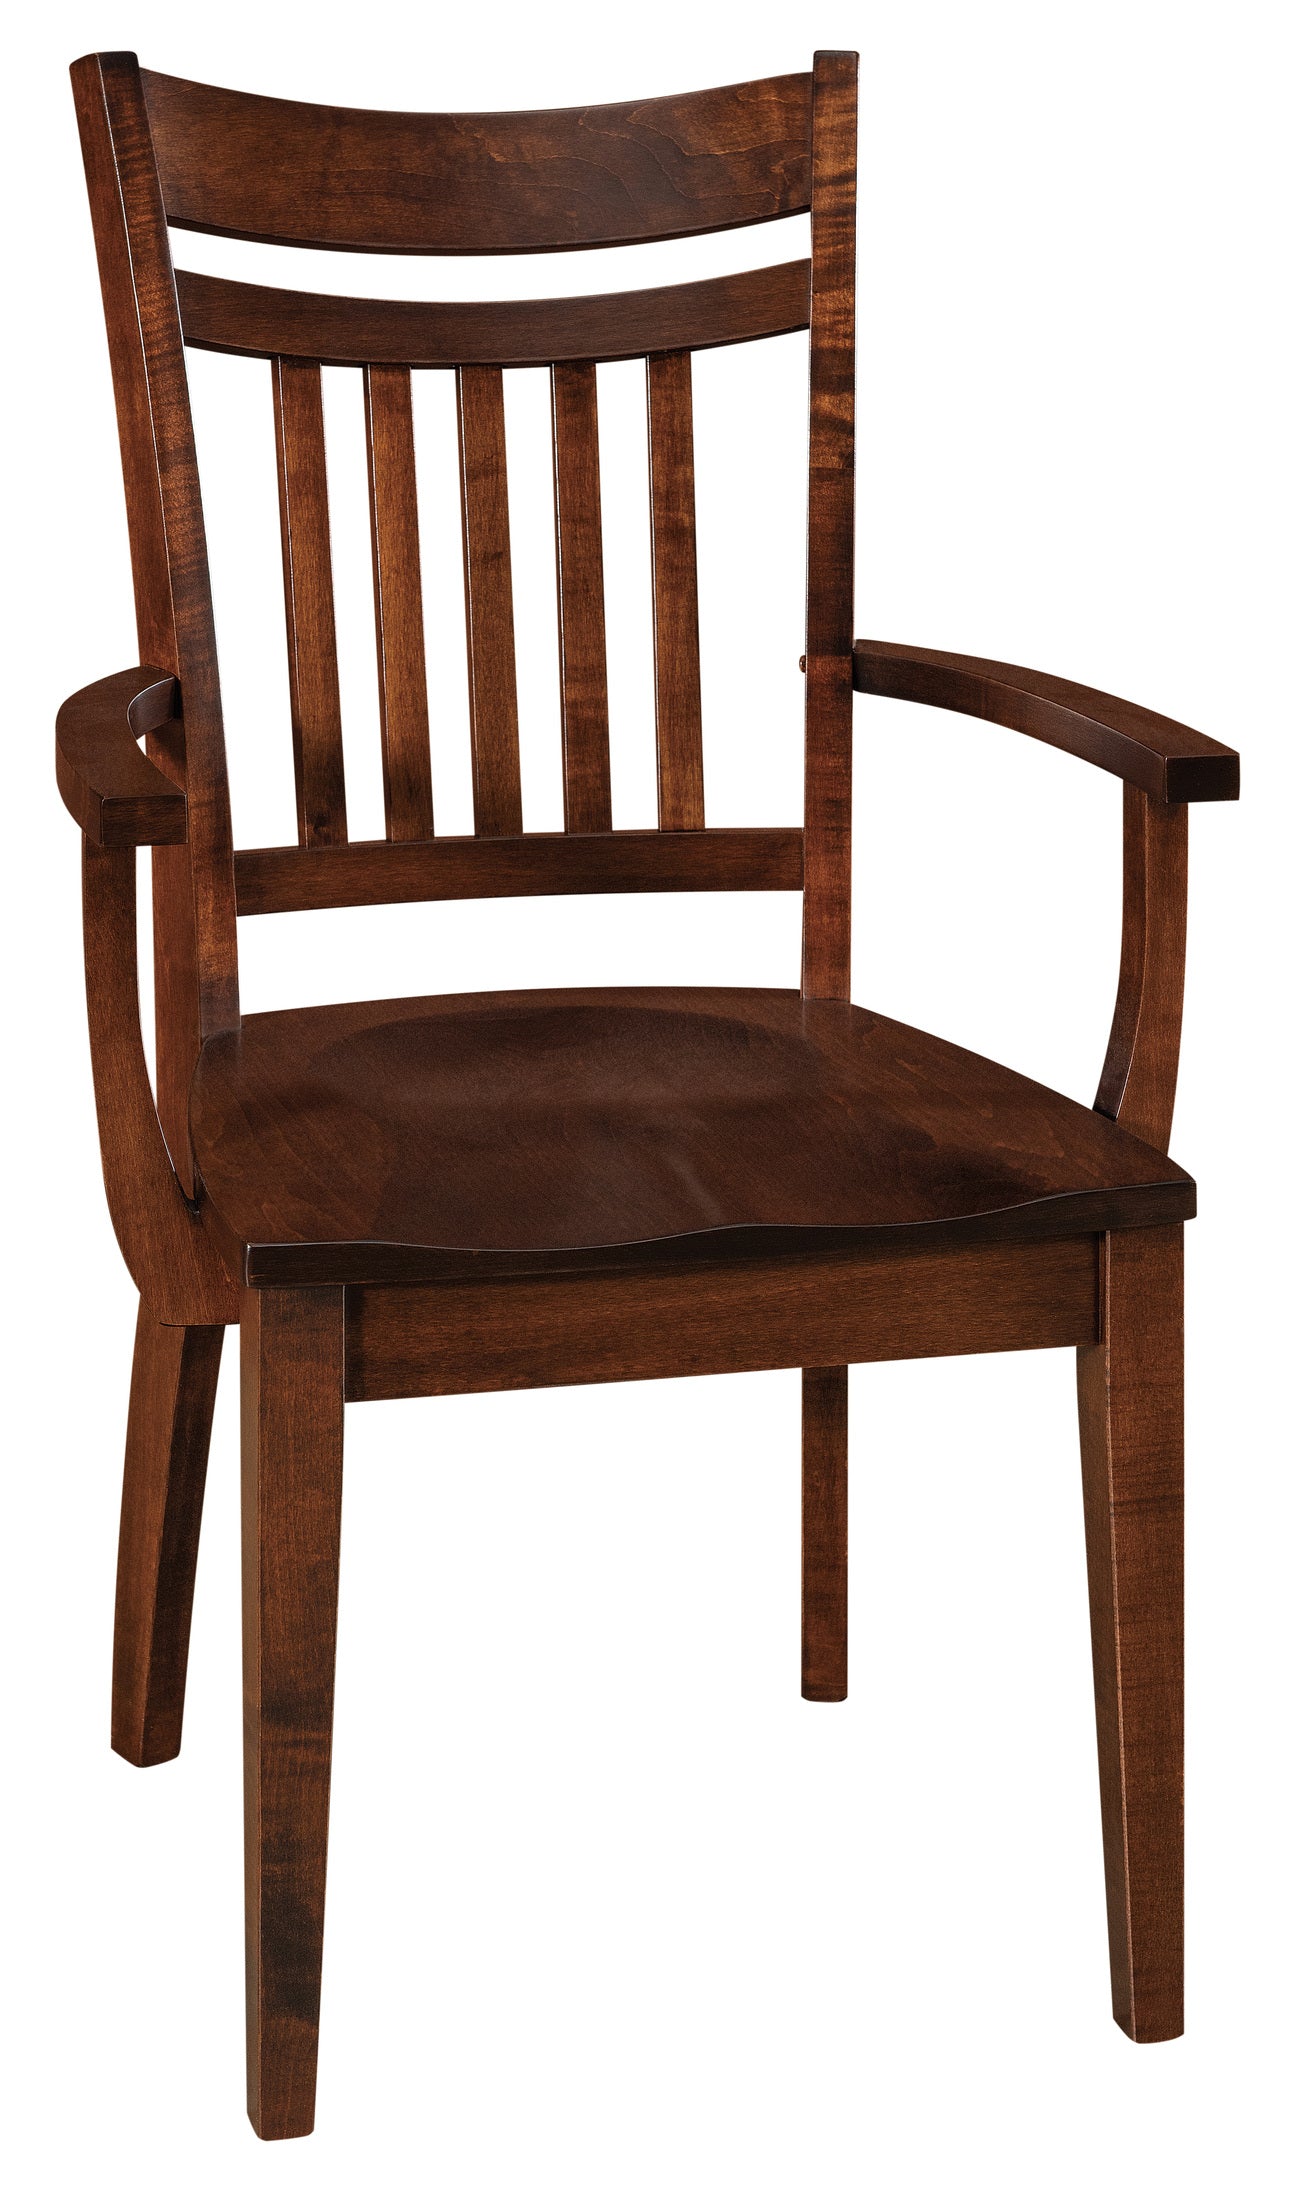 Amish Arbordale Dining Chair